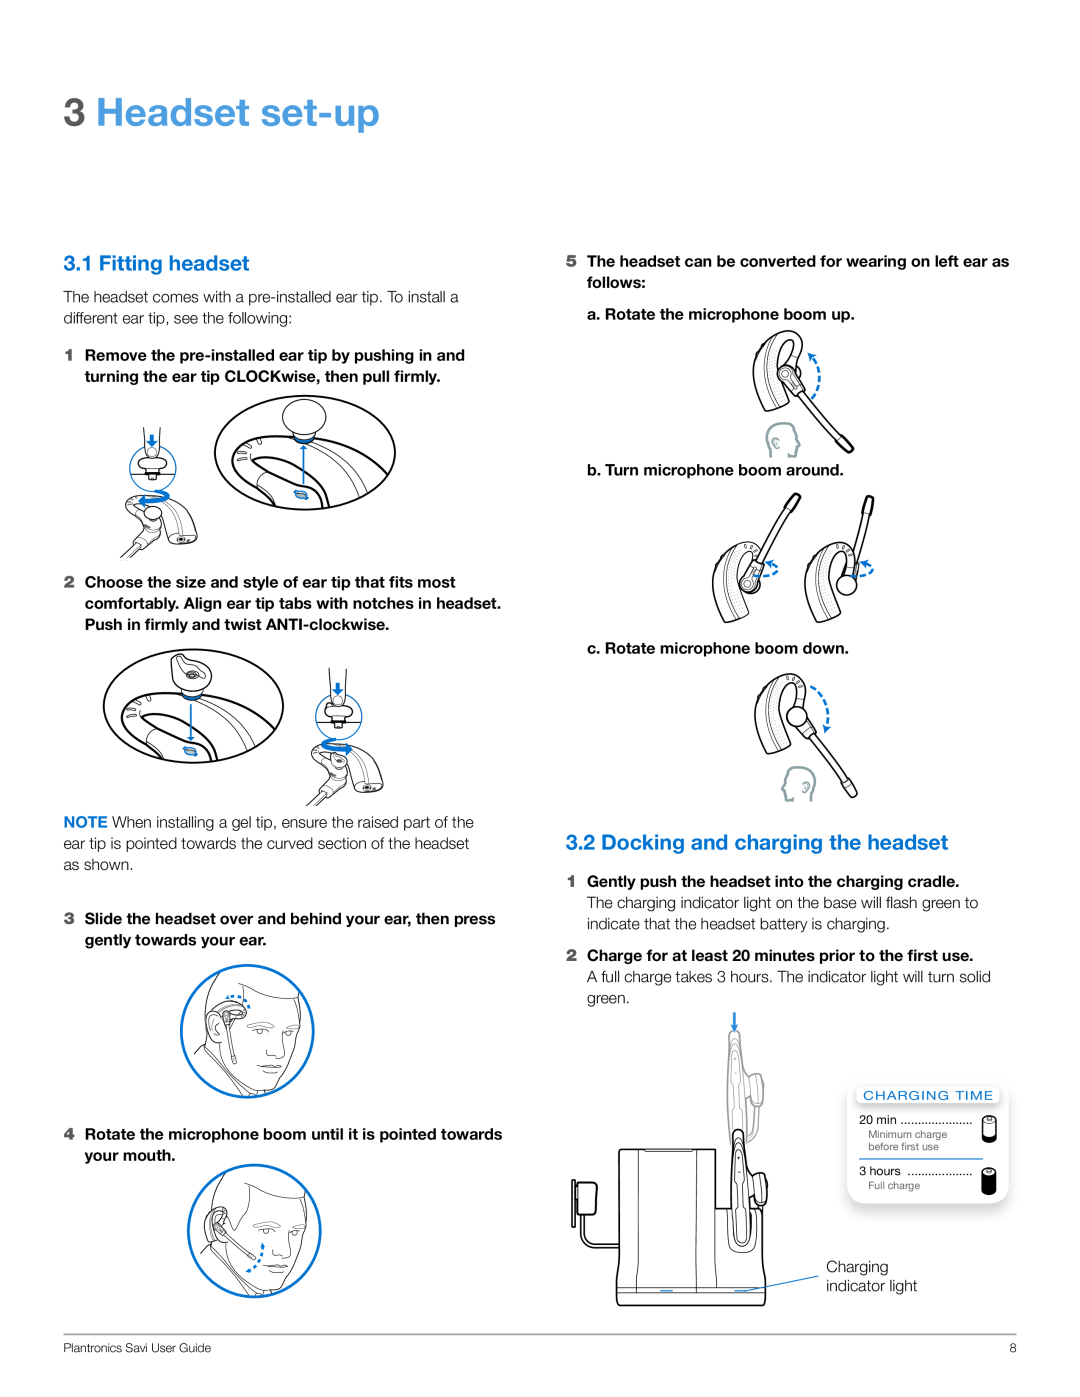 Plantronics WO200 manual Headset set-up, Fitting headset, Docking and charging the headset 